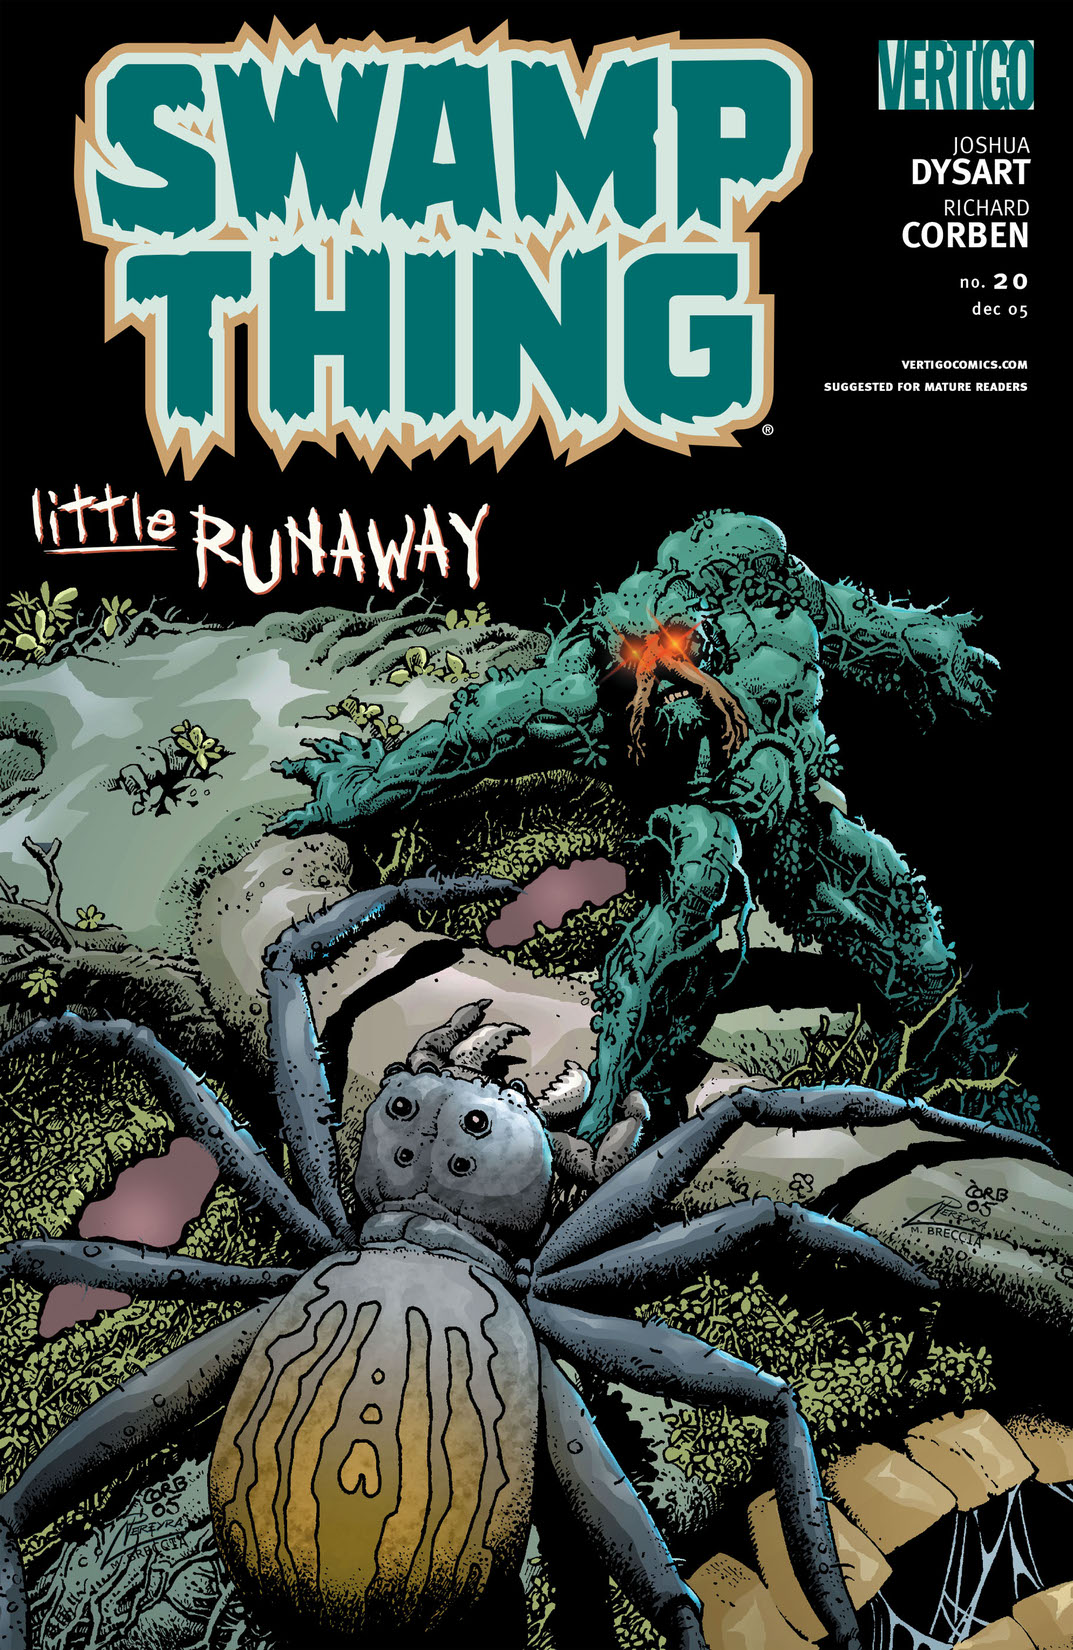 Swamp Thing (2004-) #20 preview images